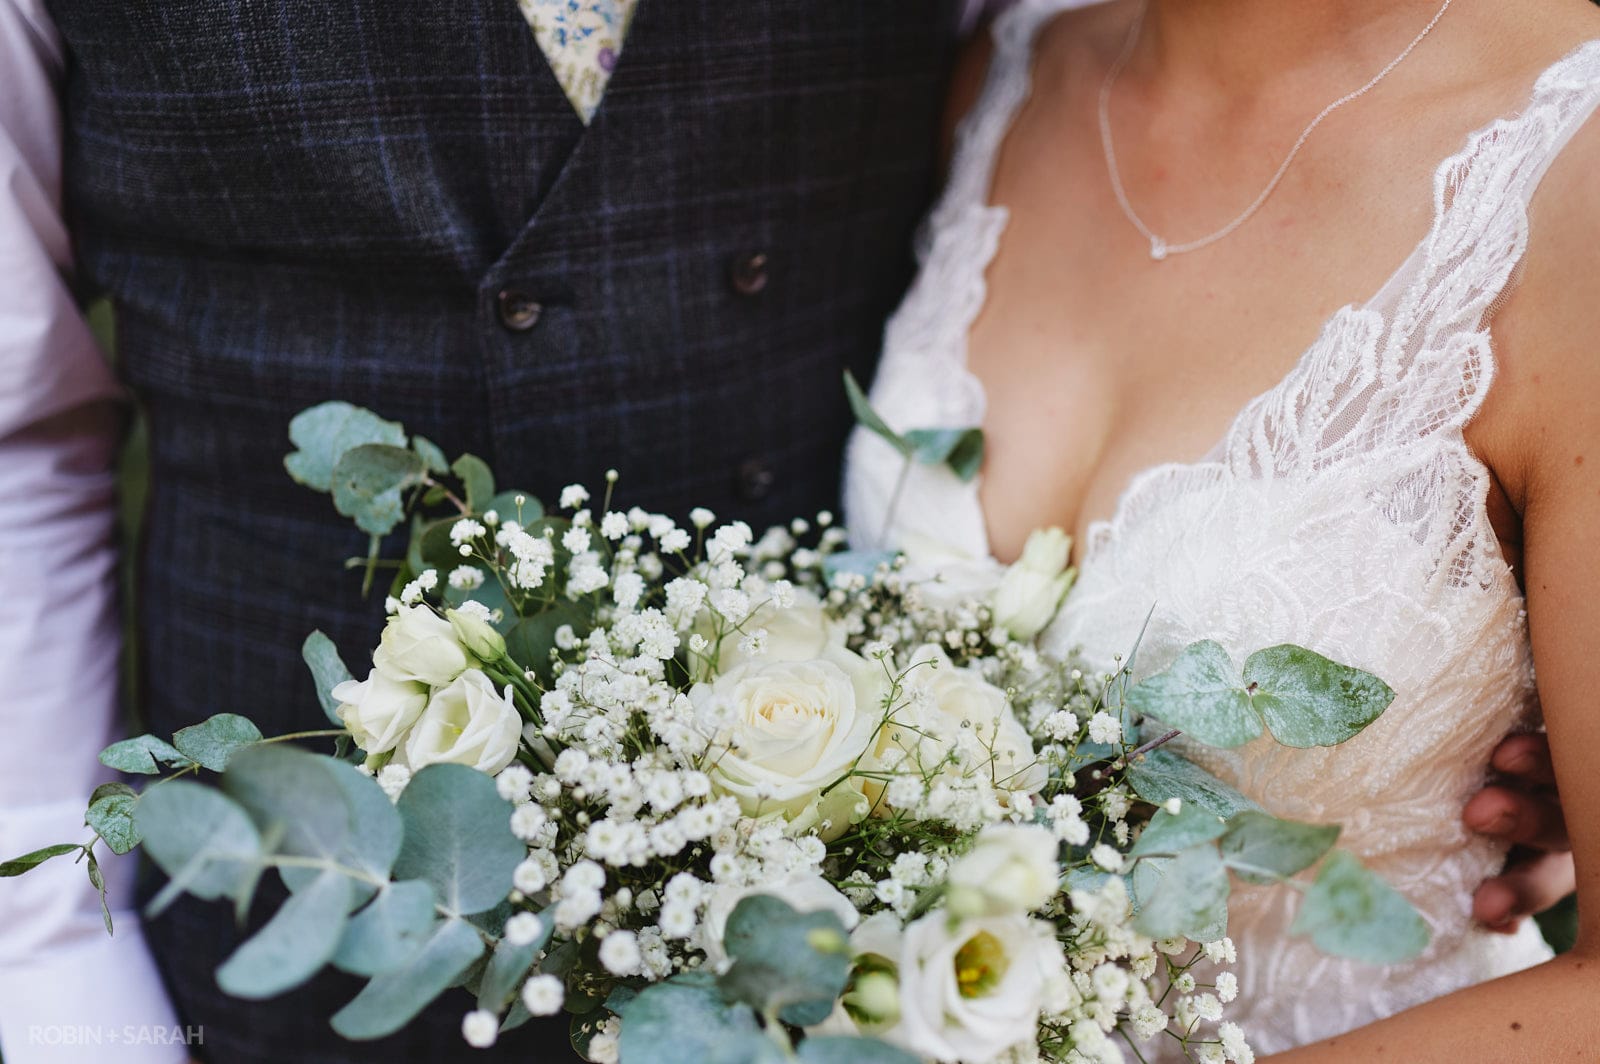 Detail of bridal bouquet and wedding dress